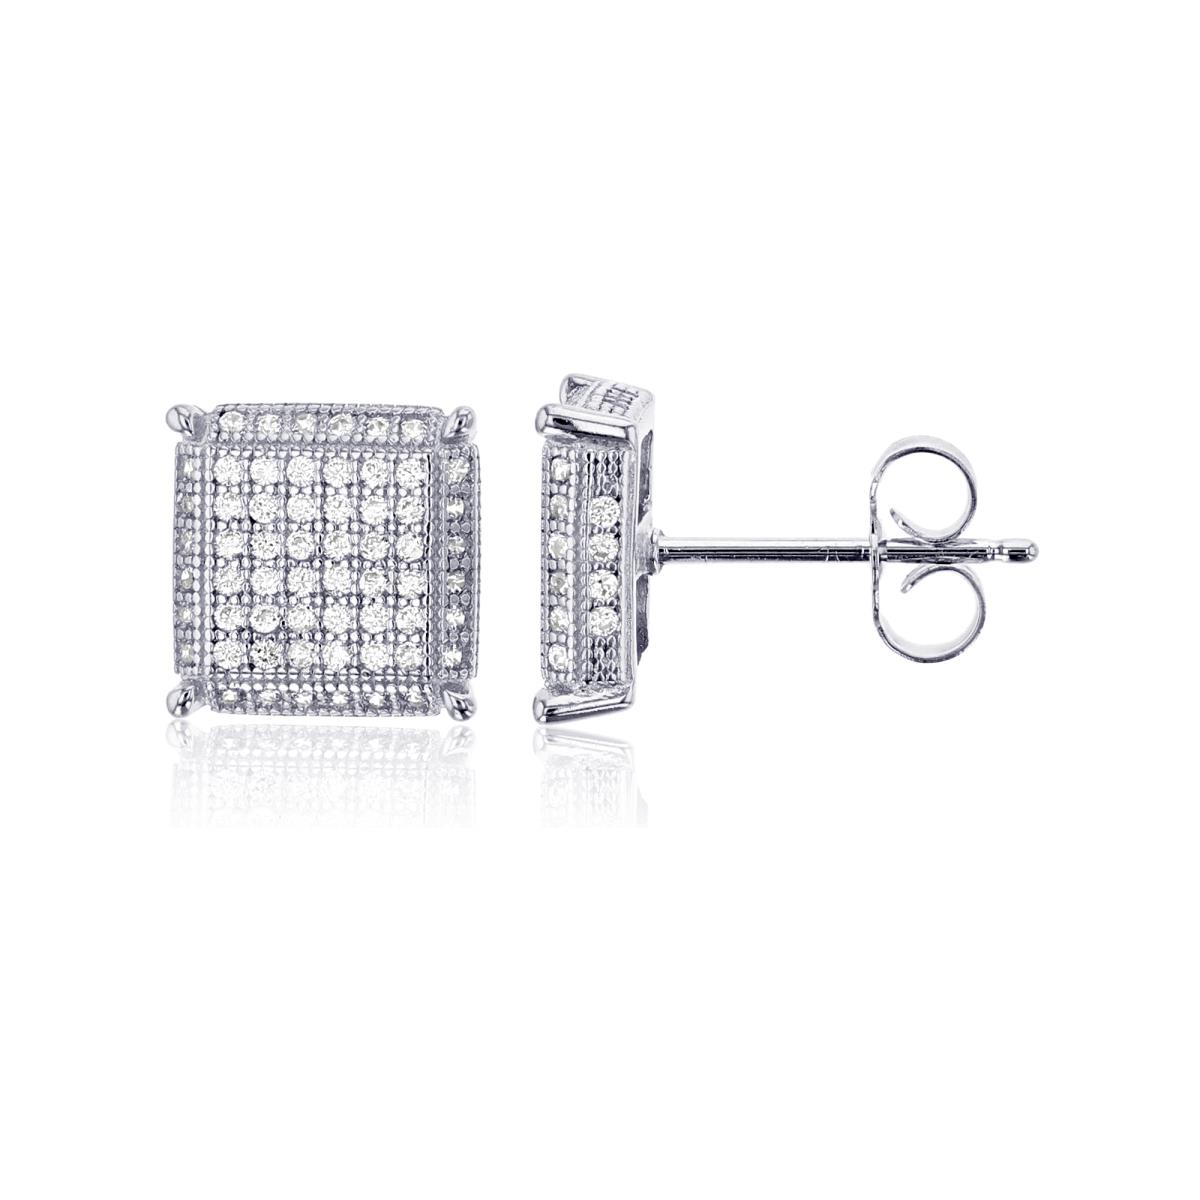 Sterling Silver 10x10mm Micropave 3D Square Stud Earring